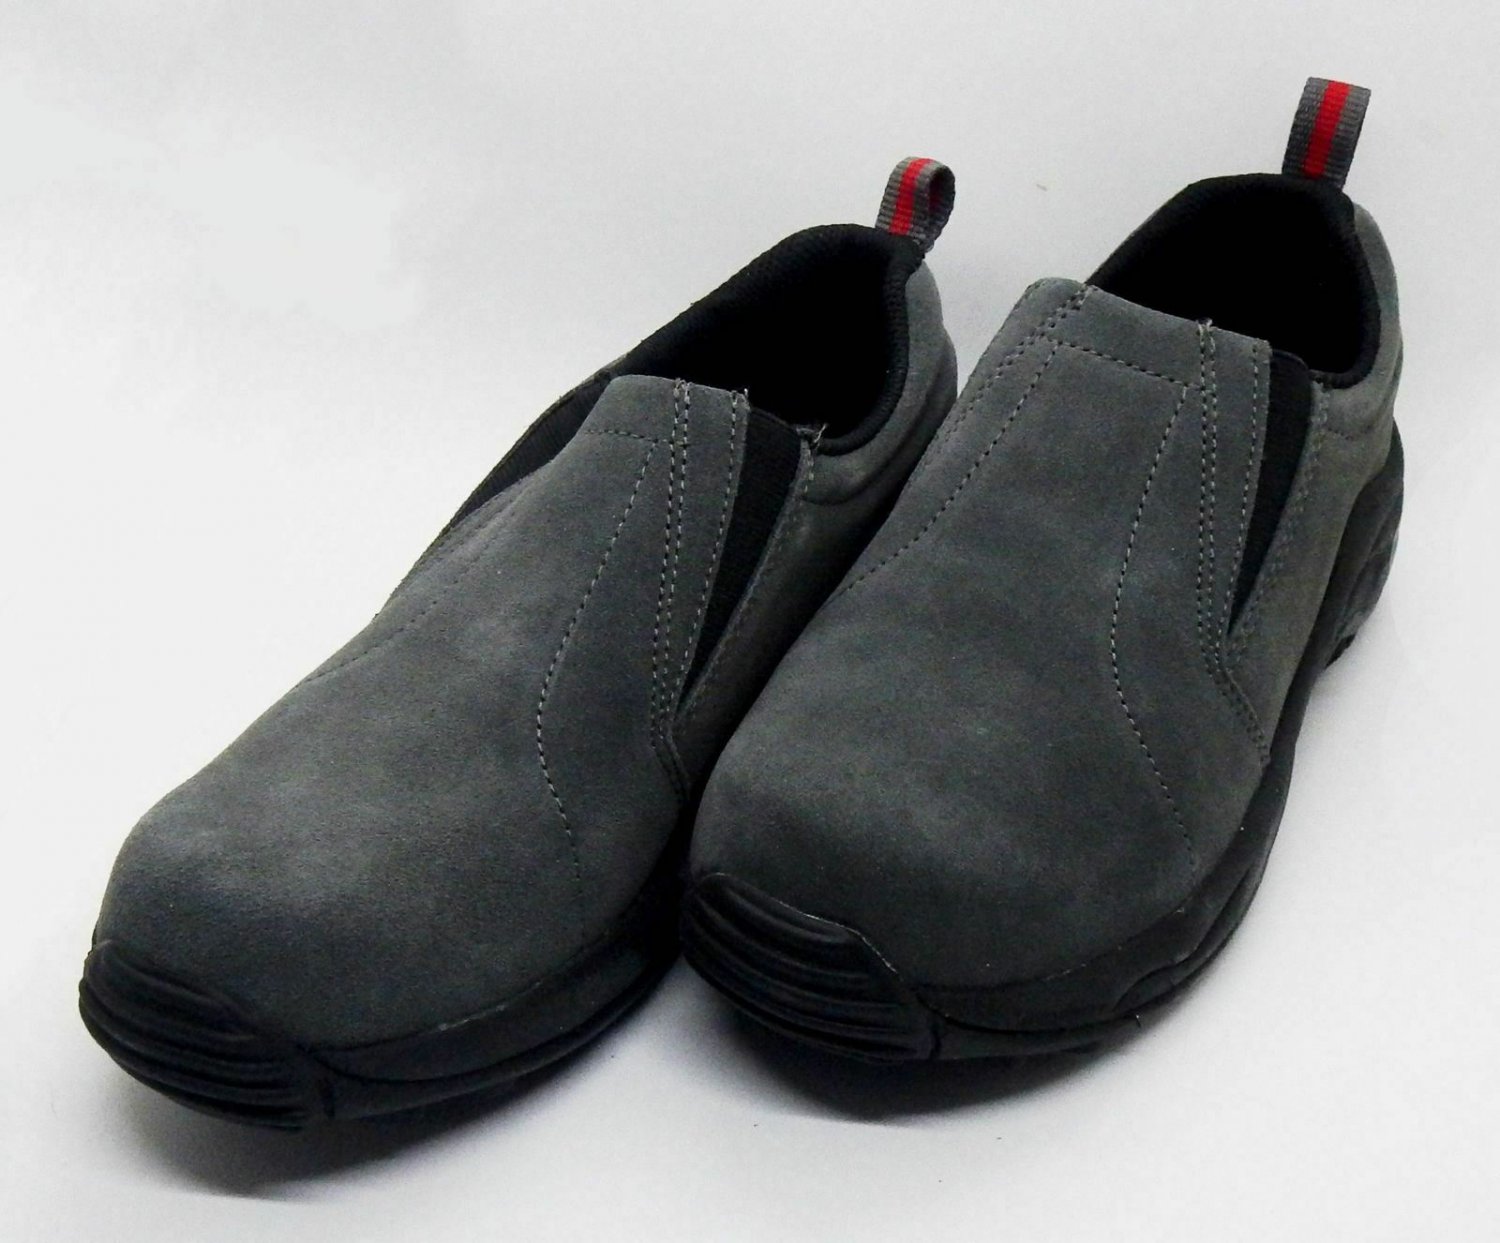 Earth Shoe Men 7.5 New Gray Suede Slip On Powder 2 Moccasin Style #4473762